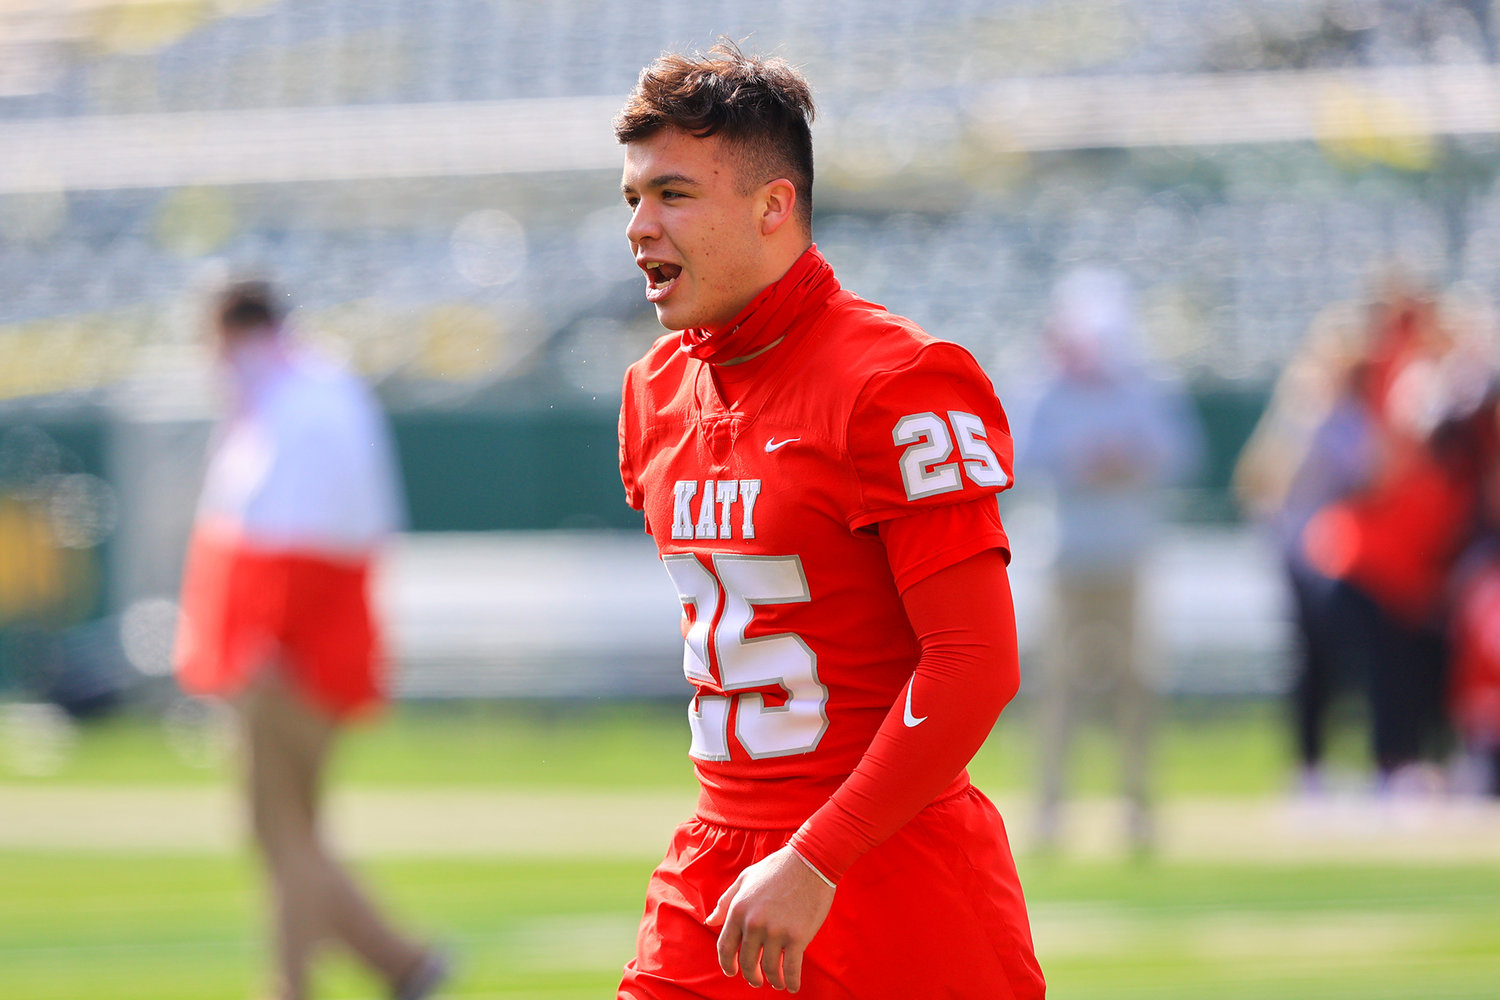 Katy High senior linebacker Shepherd Bowling was told twice during his sophomore year that his football career was over. Now he’s a team captain and relentless playmaker for a Tigers team competing for the program’s ninth state championship.